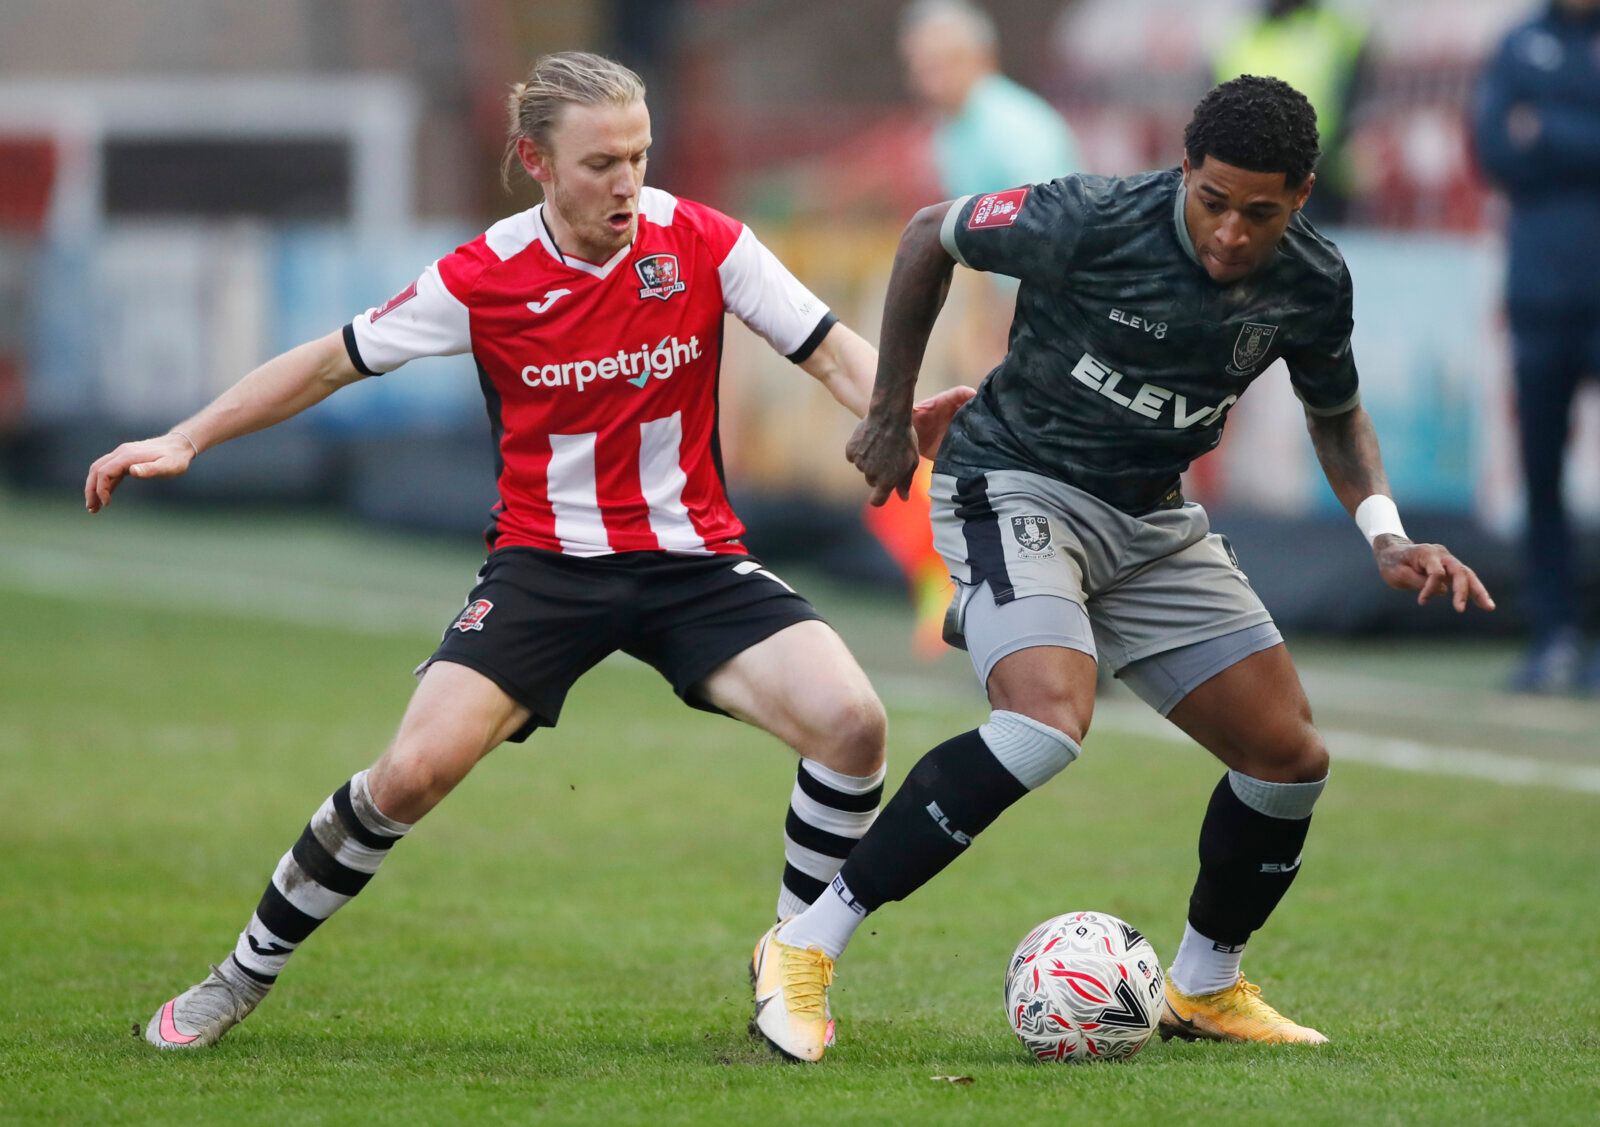 Soccer Football - FA Cup - Third Round - Exeter City v Sheffield Wednesday - St James Park, Exeter, Britain - January 9, 2021  Exeter City's Matt Jay in action with Sheffield Wednesday's Kadeem Harris Action Images via Reuters/Paul Childs